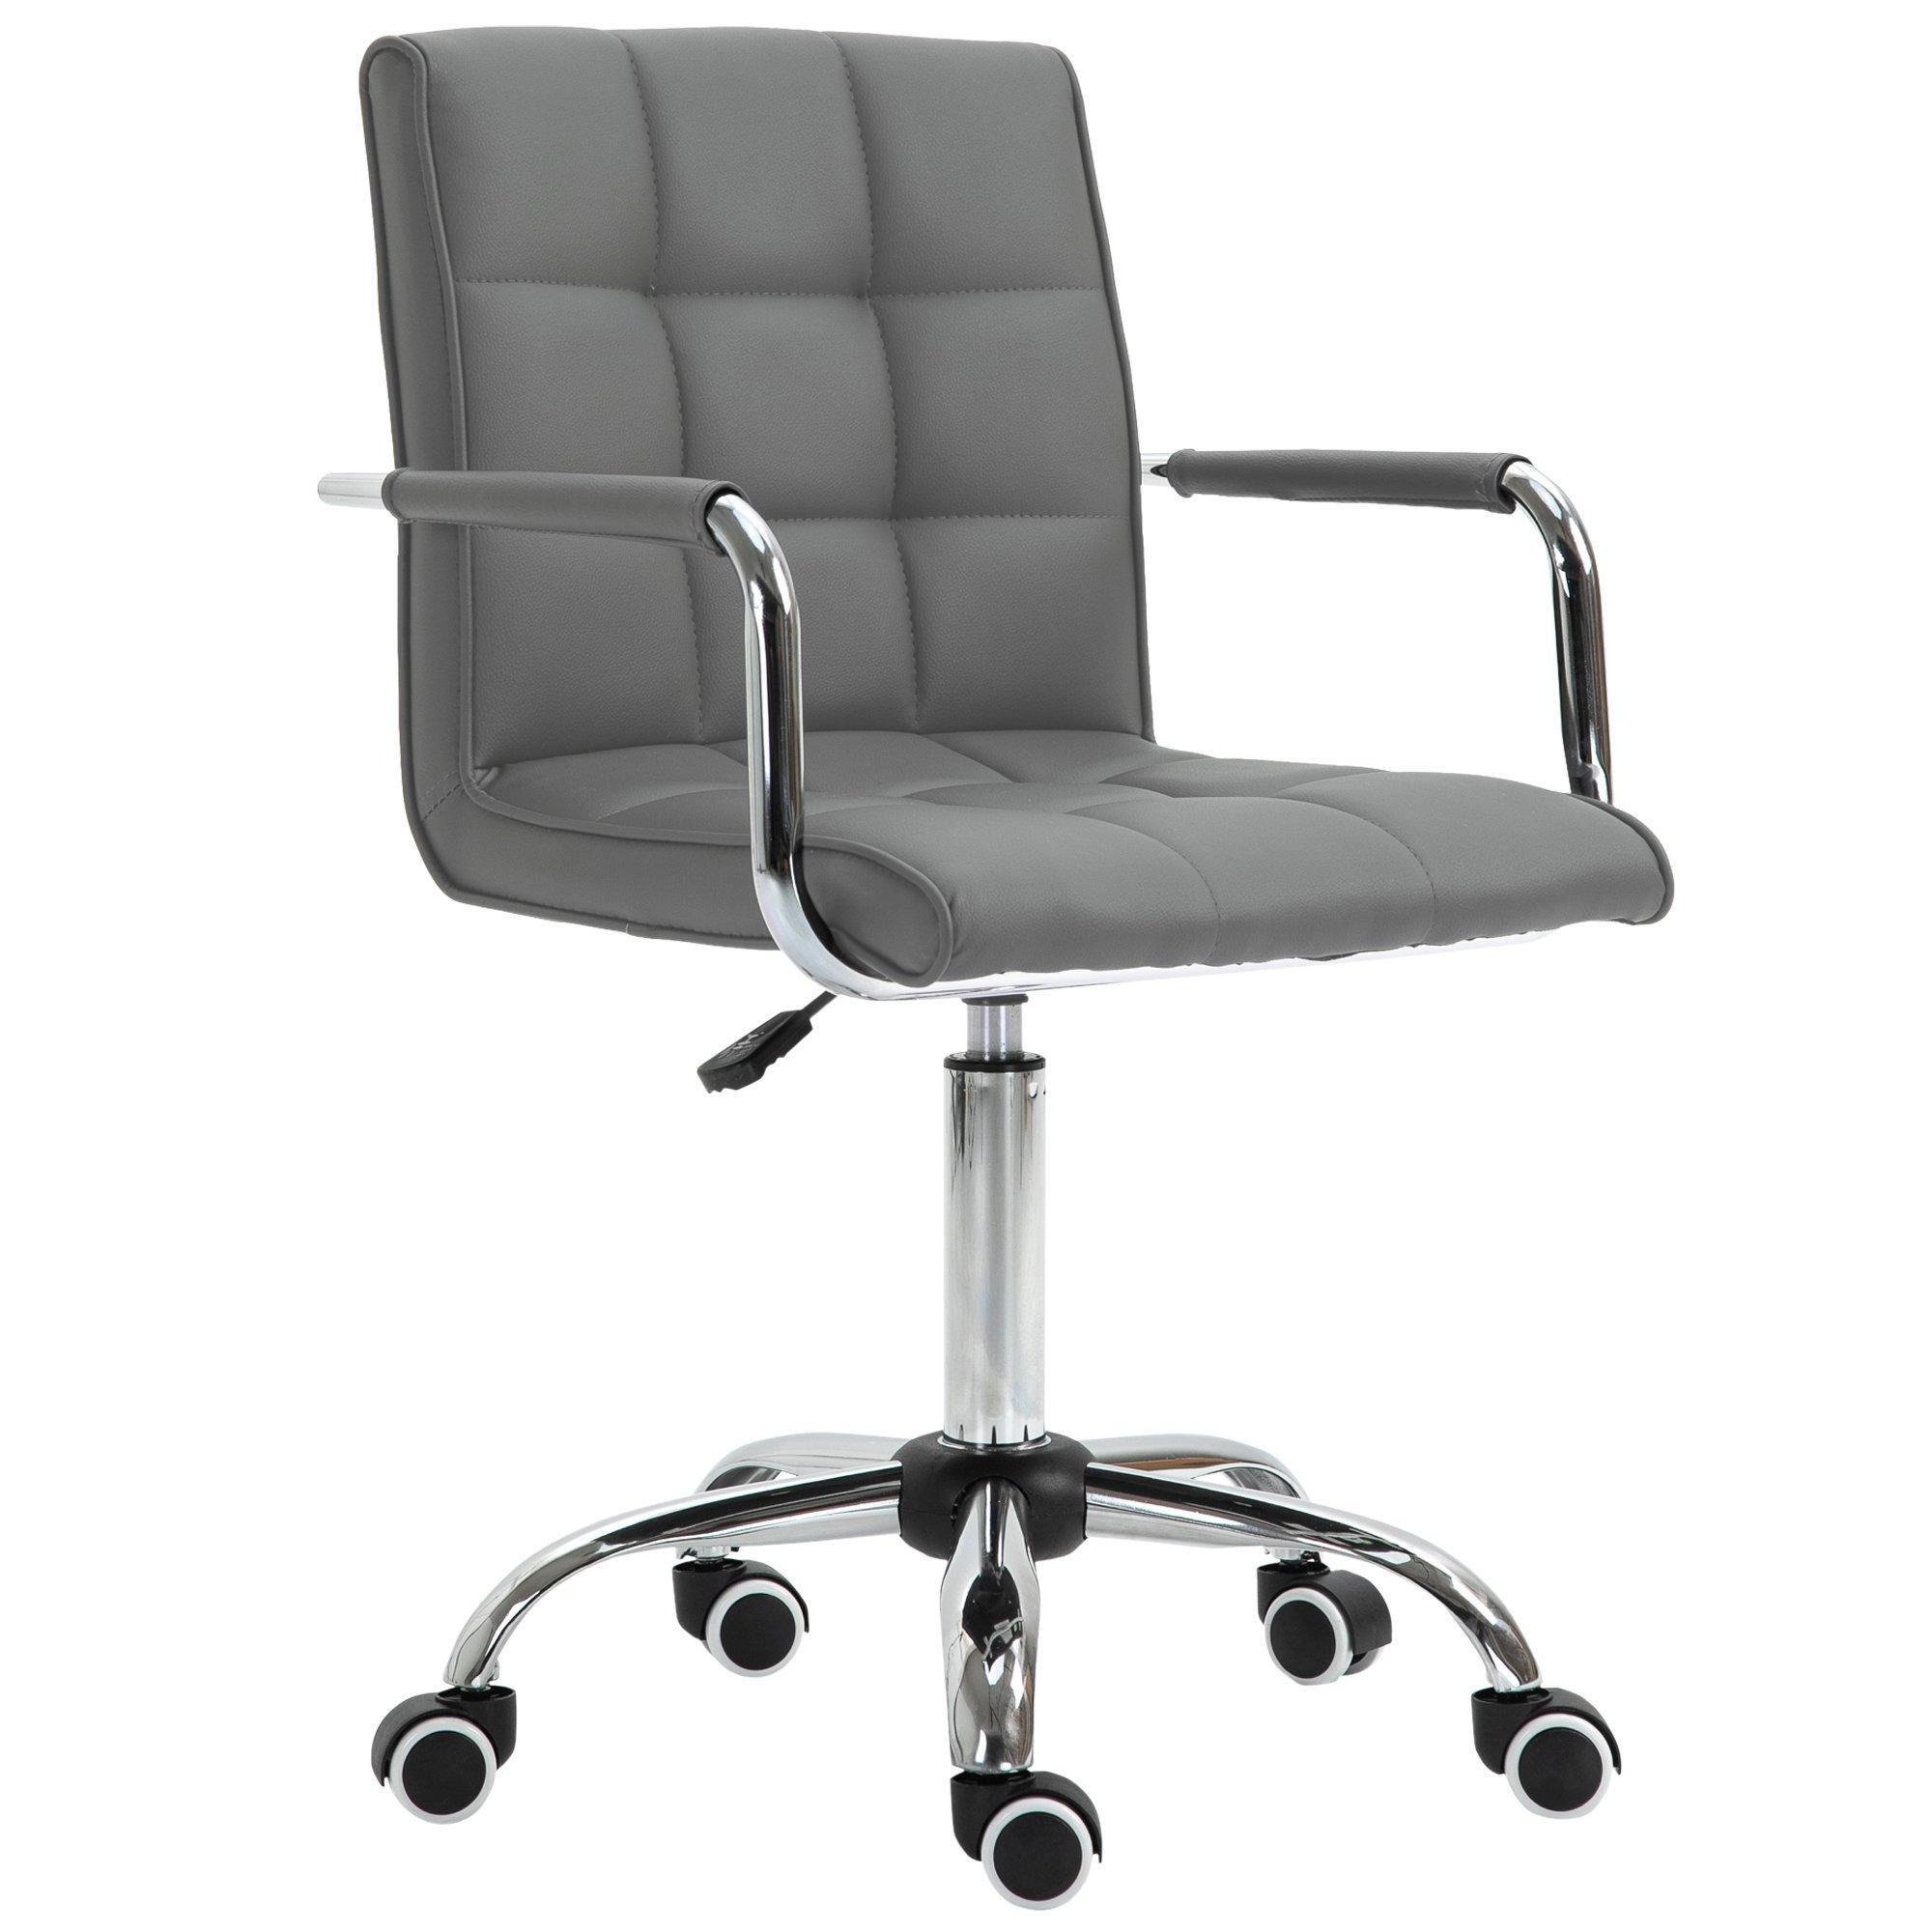 Mid Back PU Leather Home Office Chair Swivel Desk Chair Arm Wheel - image 1